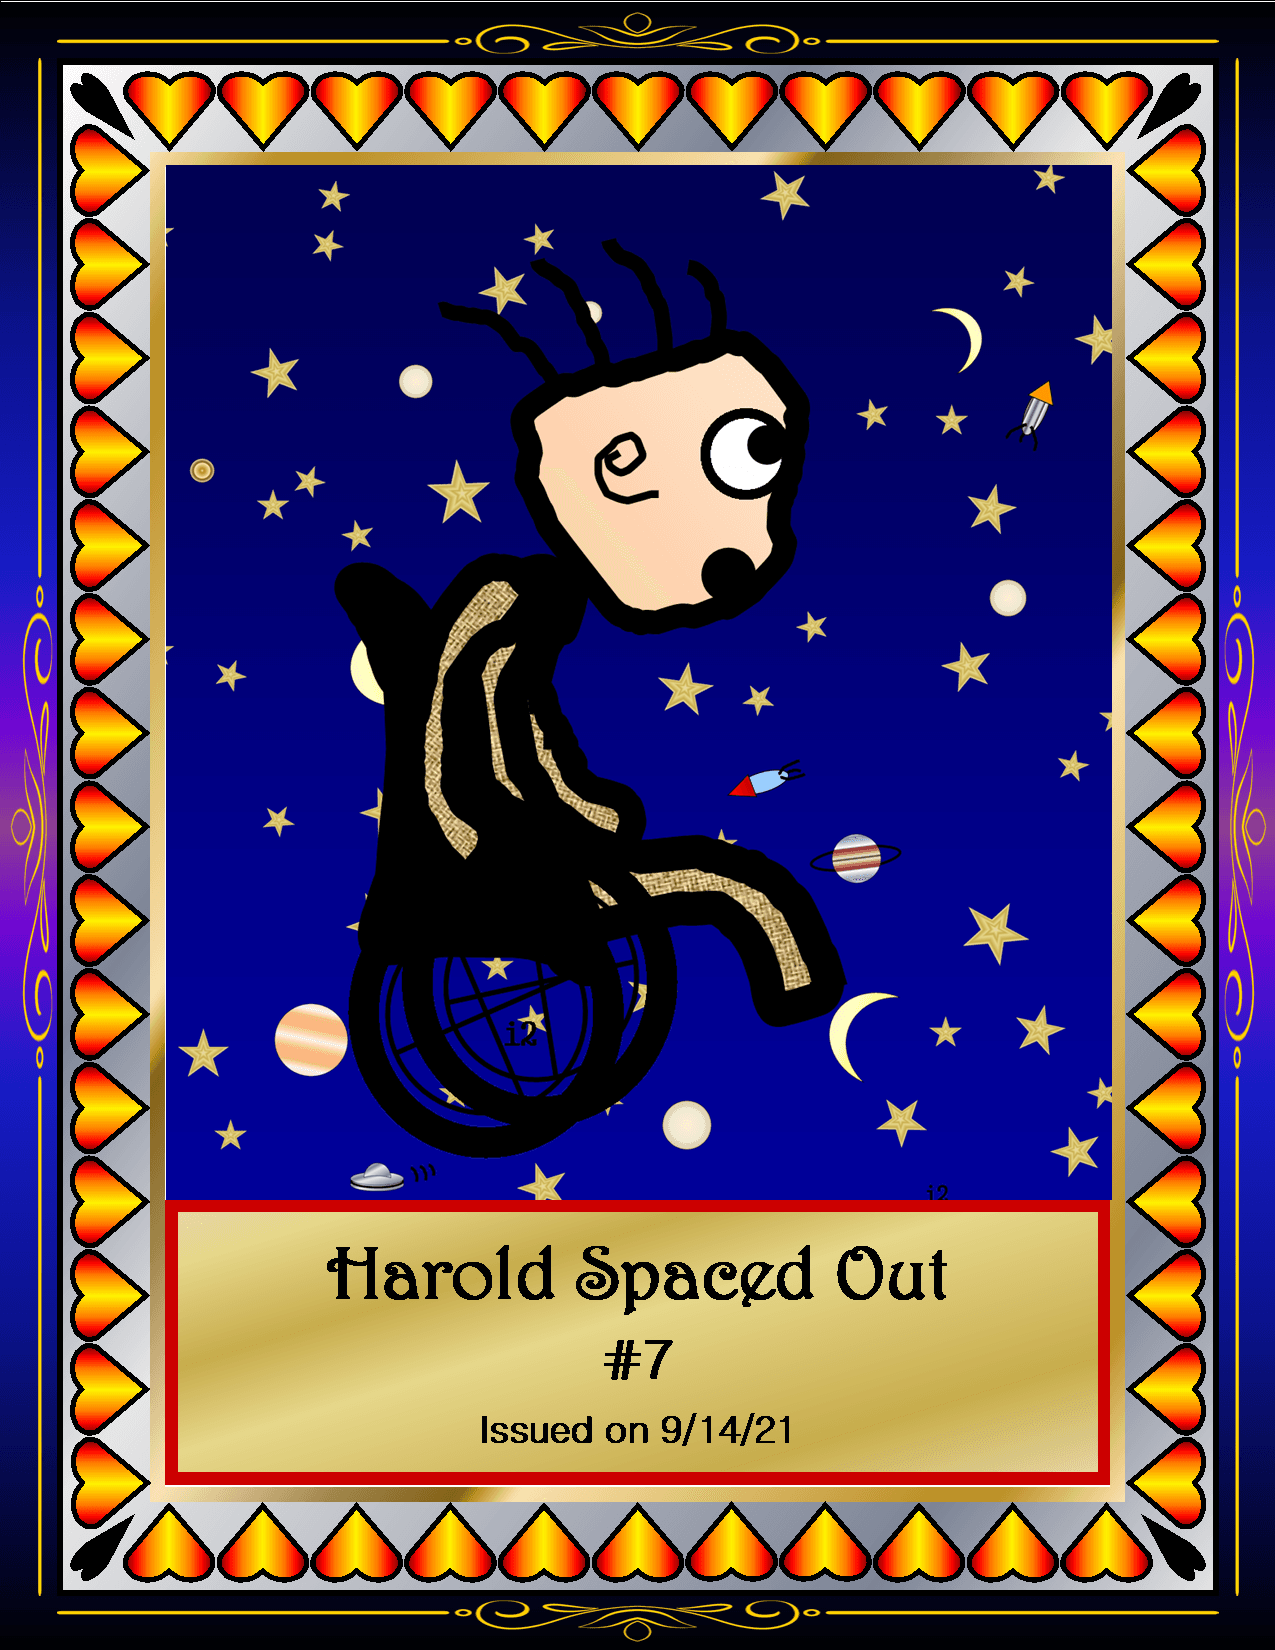 Harold Spaced Out